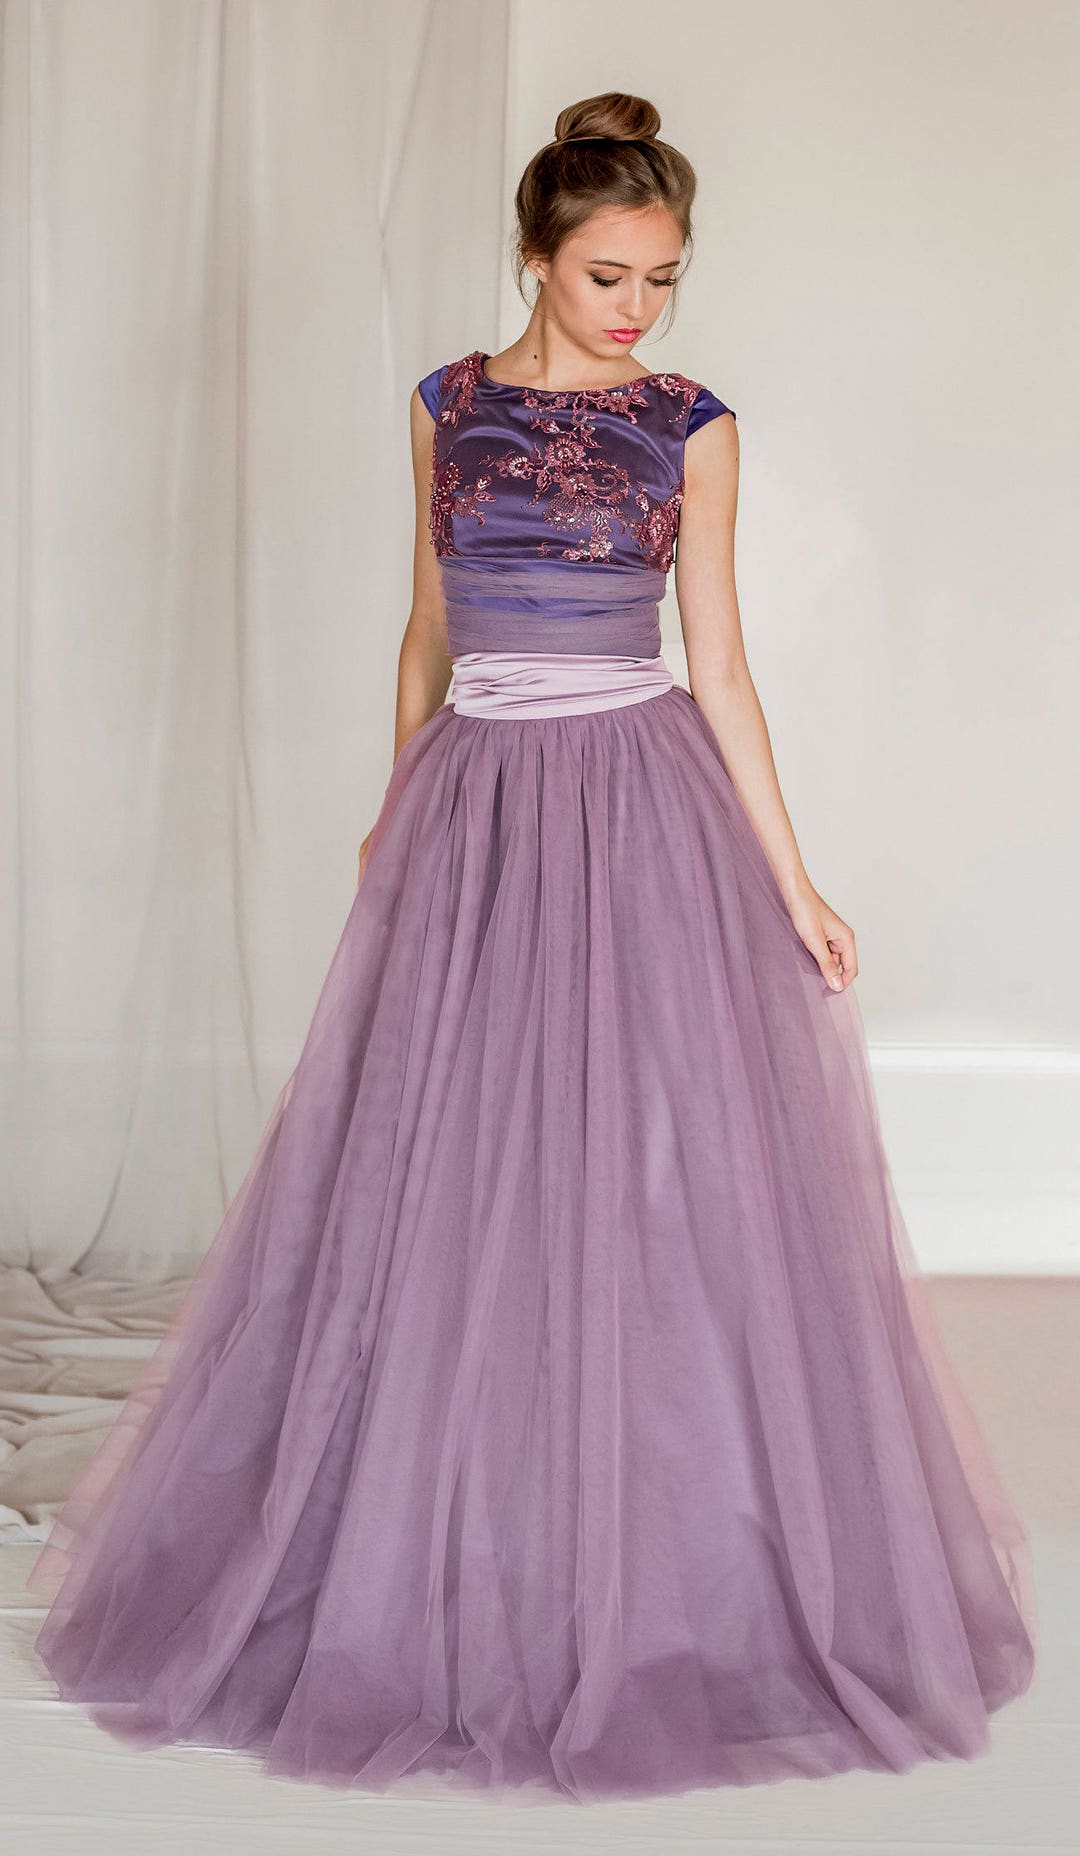 SAMPLE SALE 2 Piece Tulle Evening Dress Crop Top and Tulle - Etsy